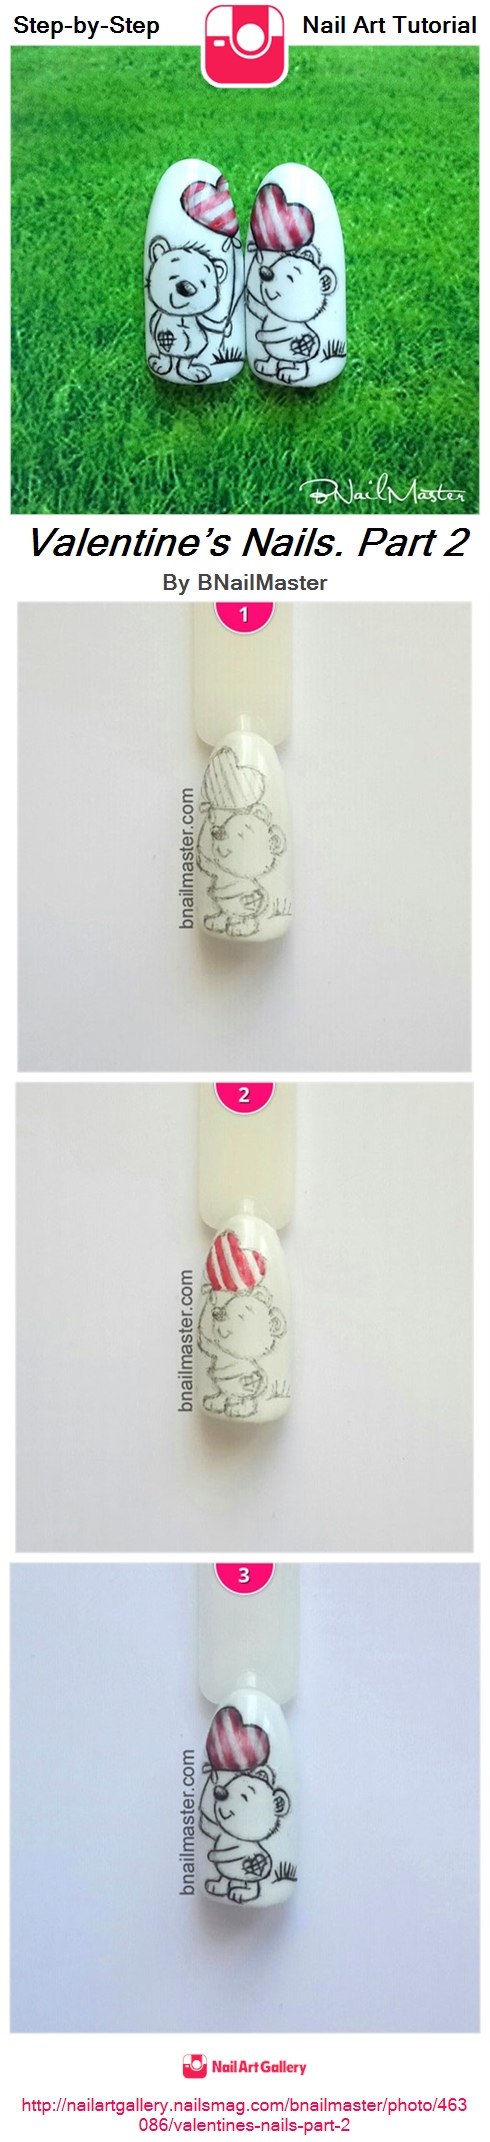 Valentine’s Nails. Part 2 - Nail Art Gallery